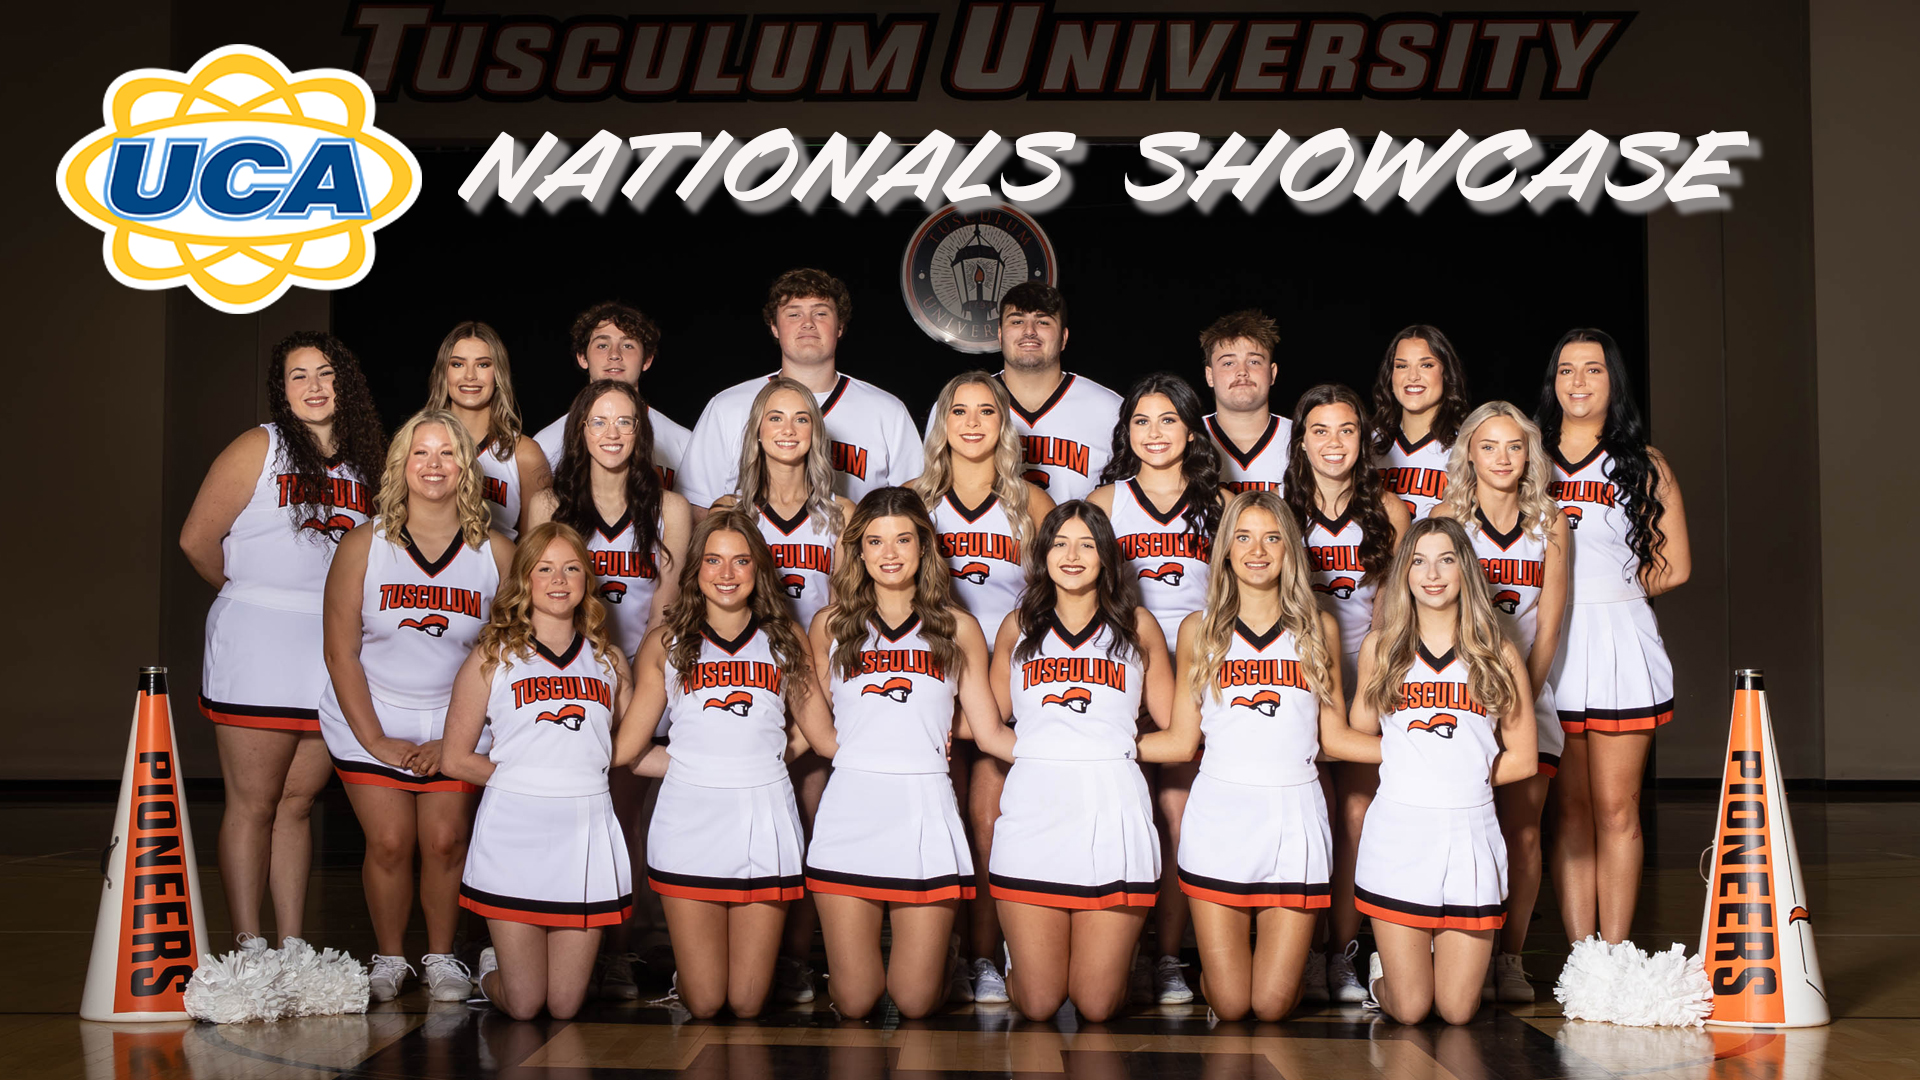 Tusculum Cheer to host Nationals Showcase this Tuesday